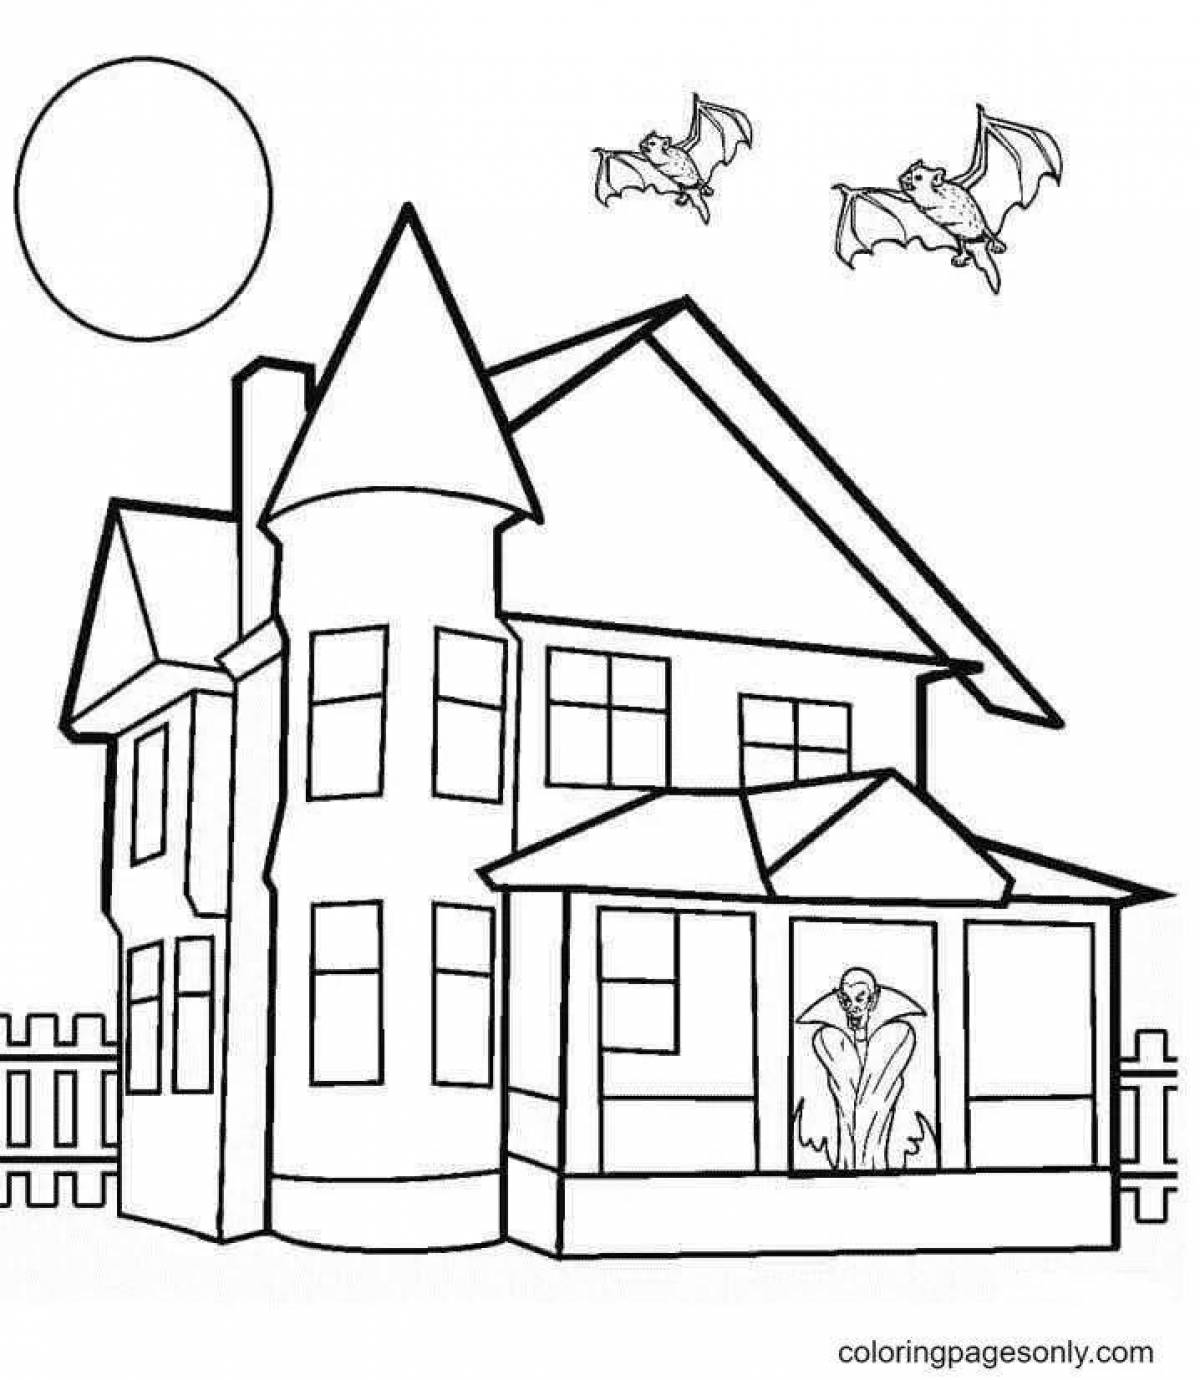 Coloring book shining dream house